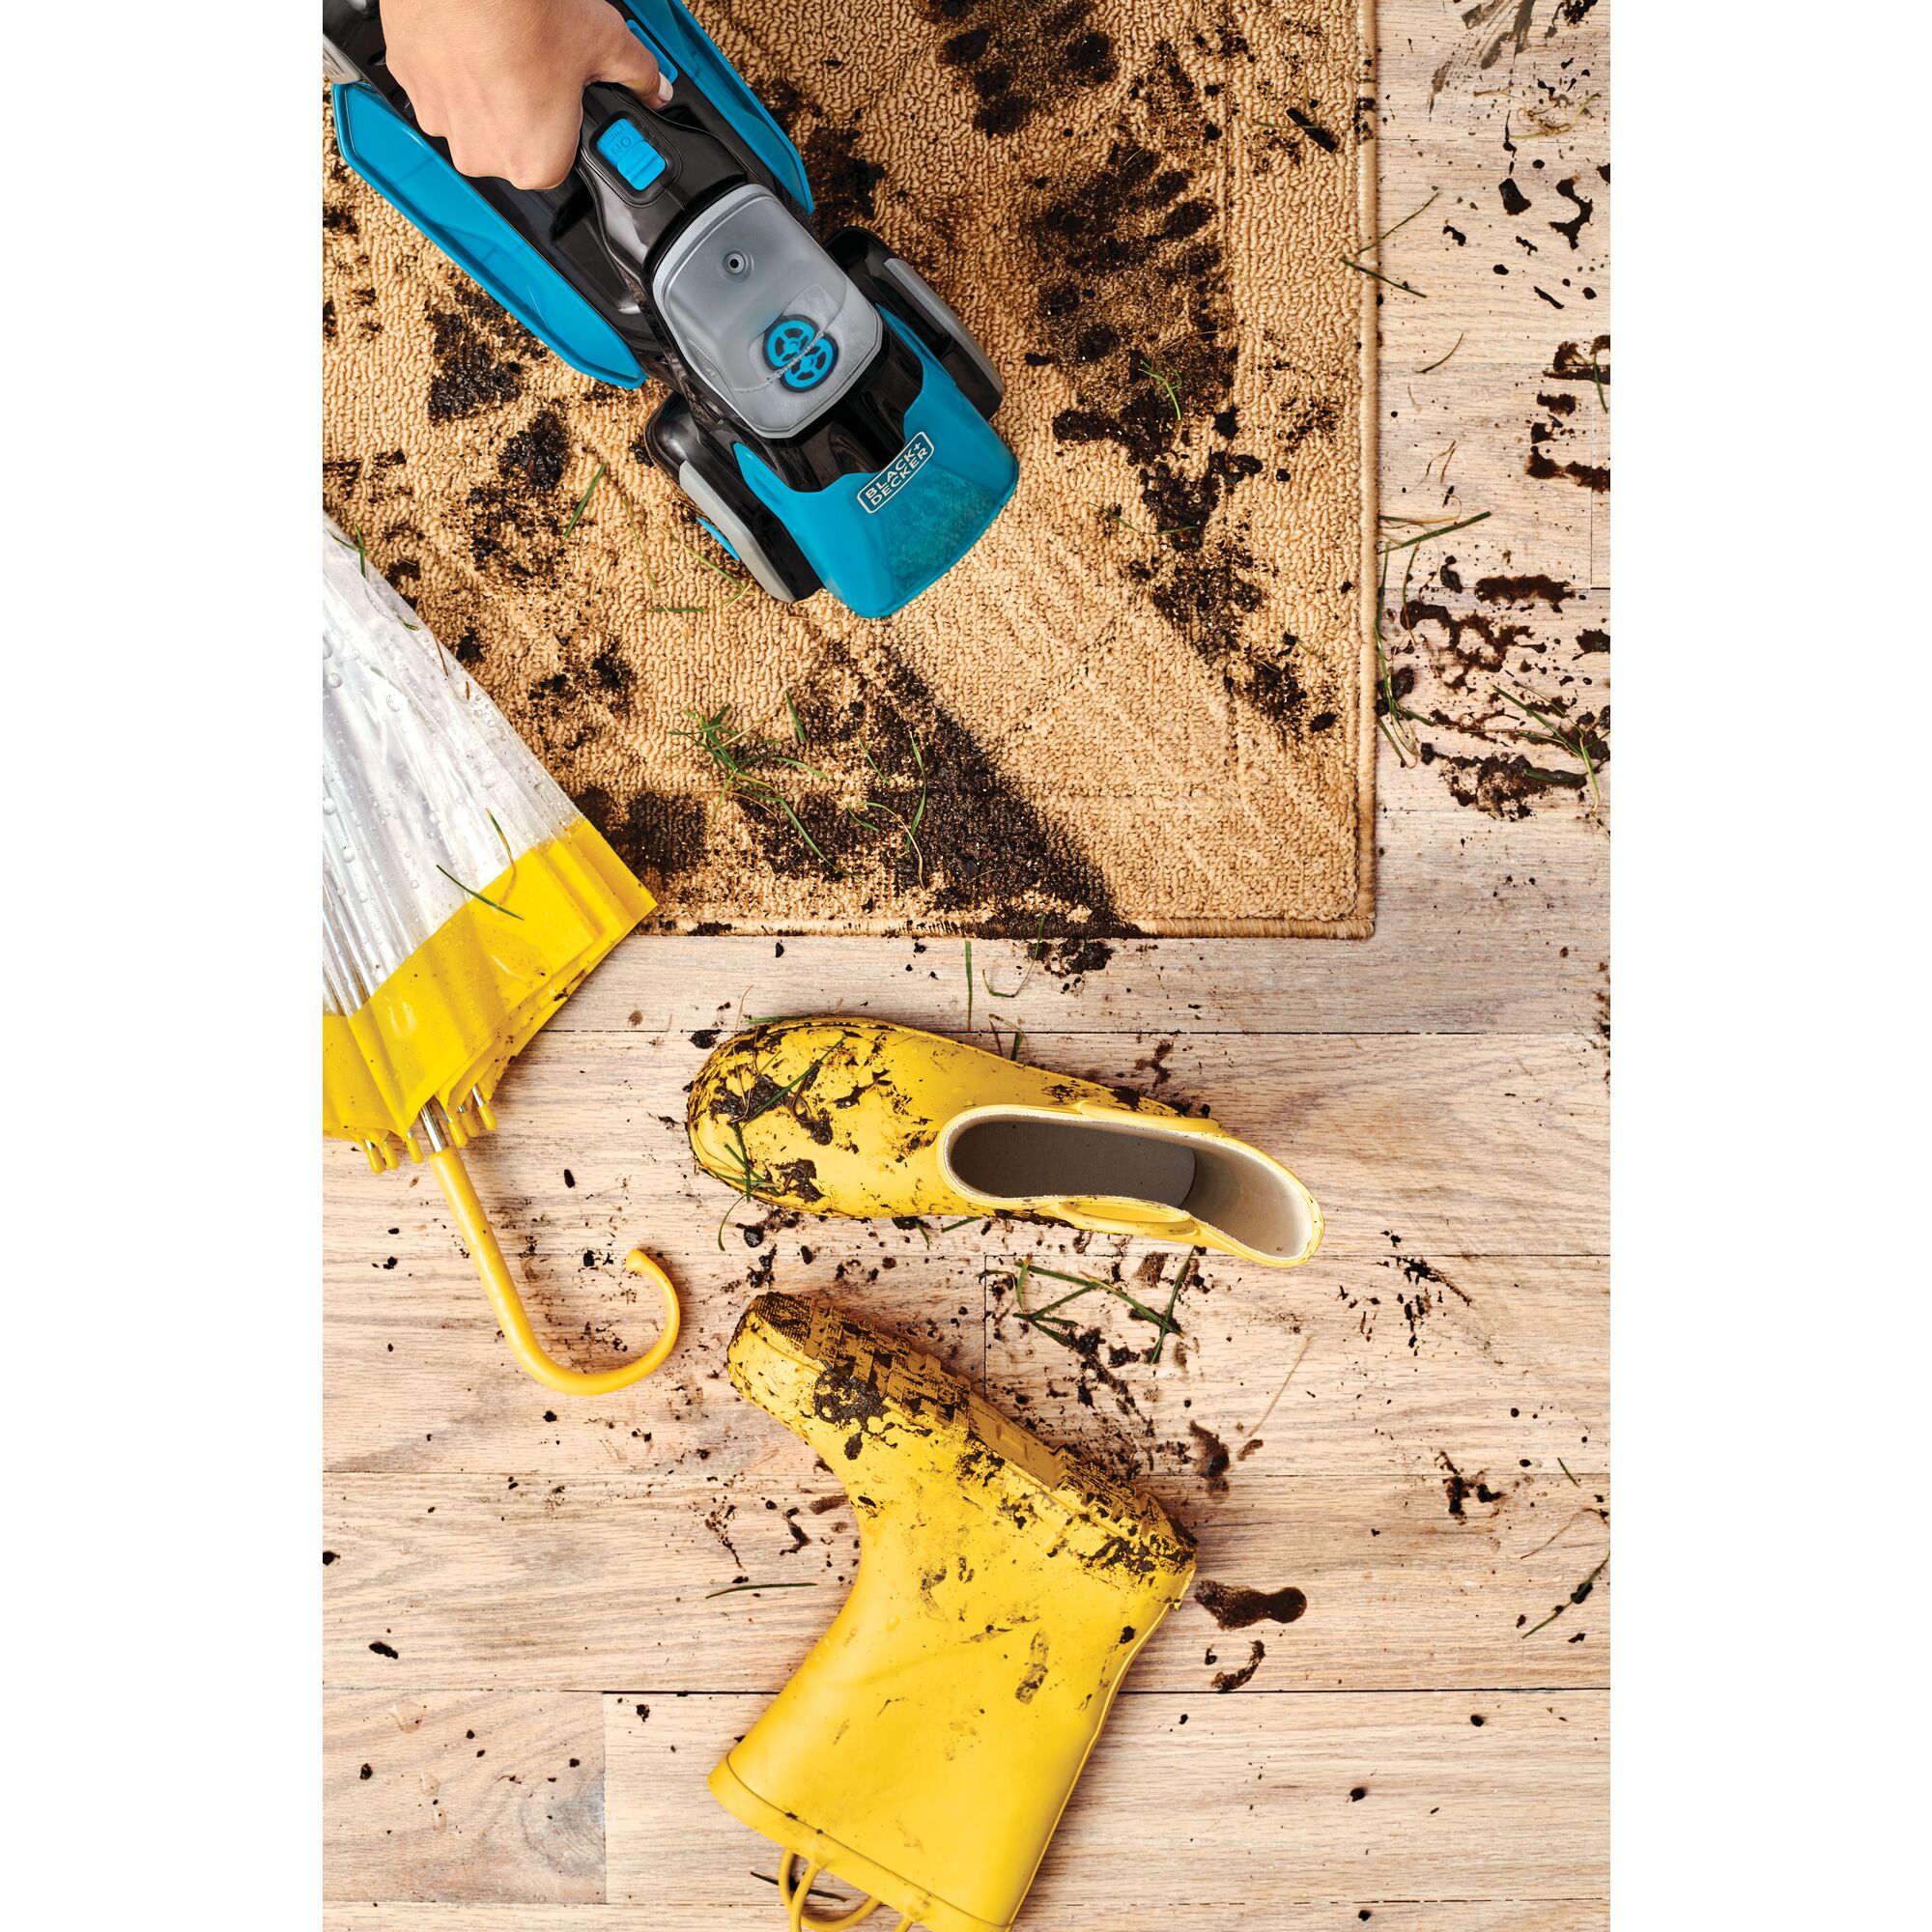 Spillbuster cordless spill and spot cleaner with powered scrub brush being used.